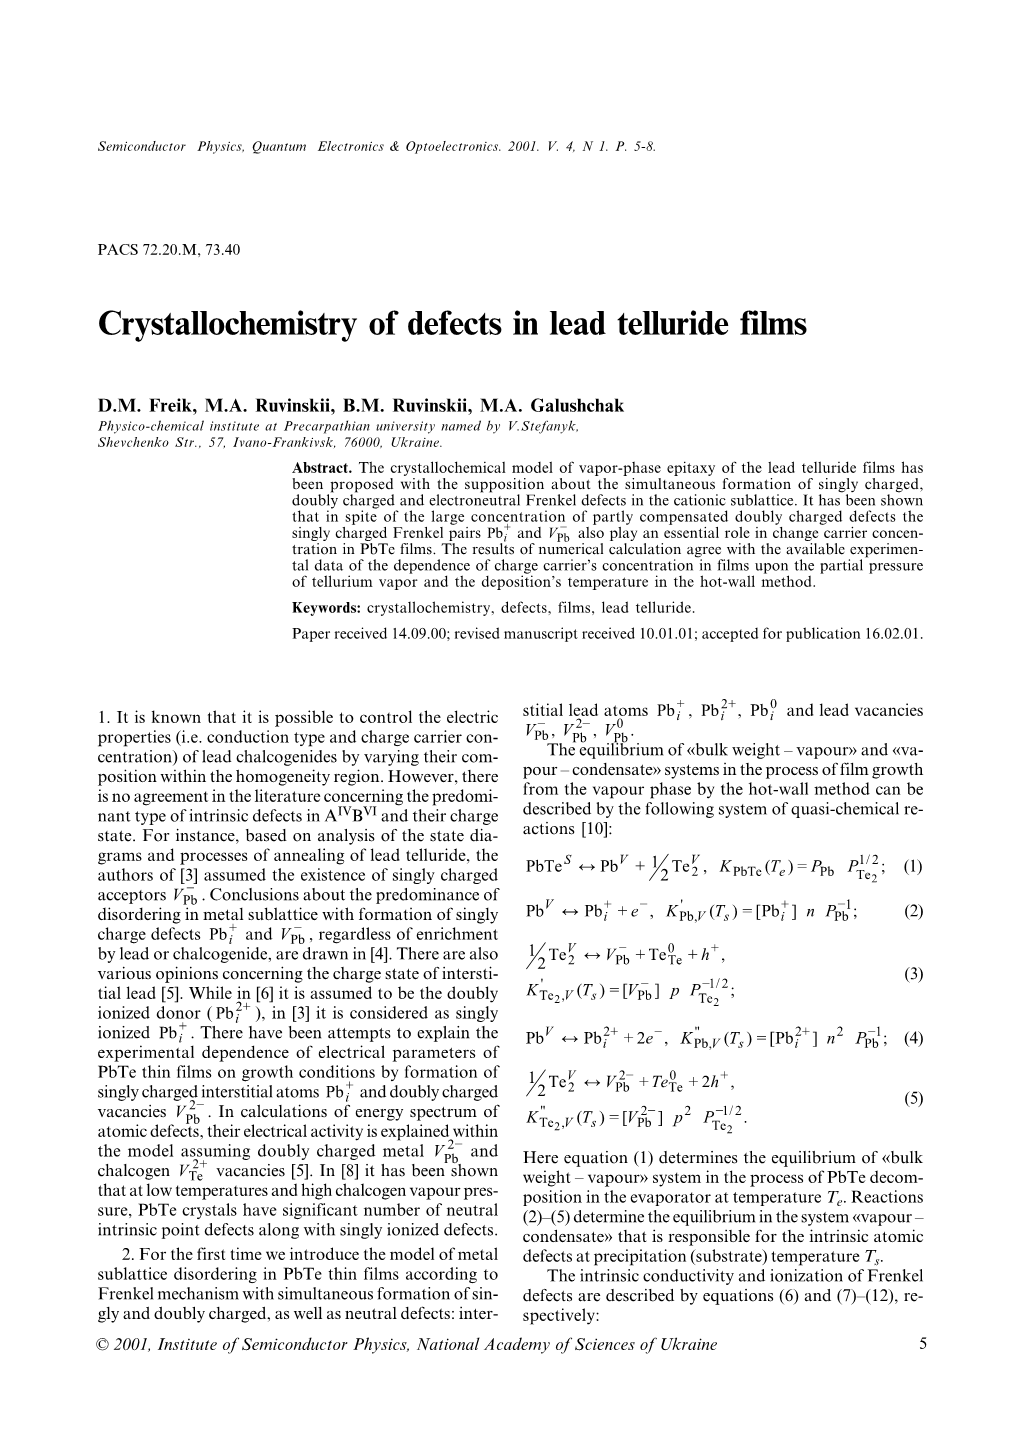 Crystallochemistry of Defects in Lead Telluride Films